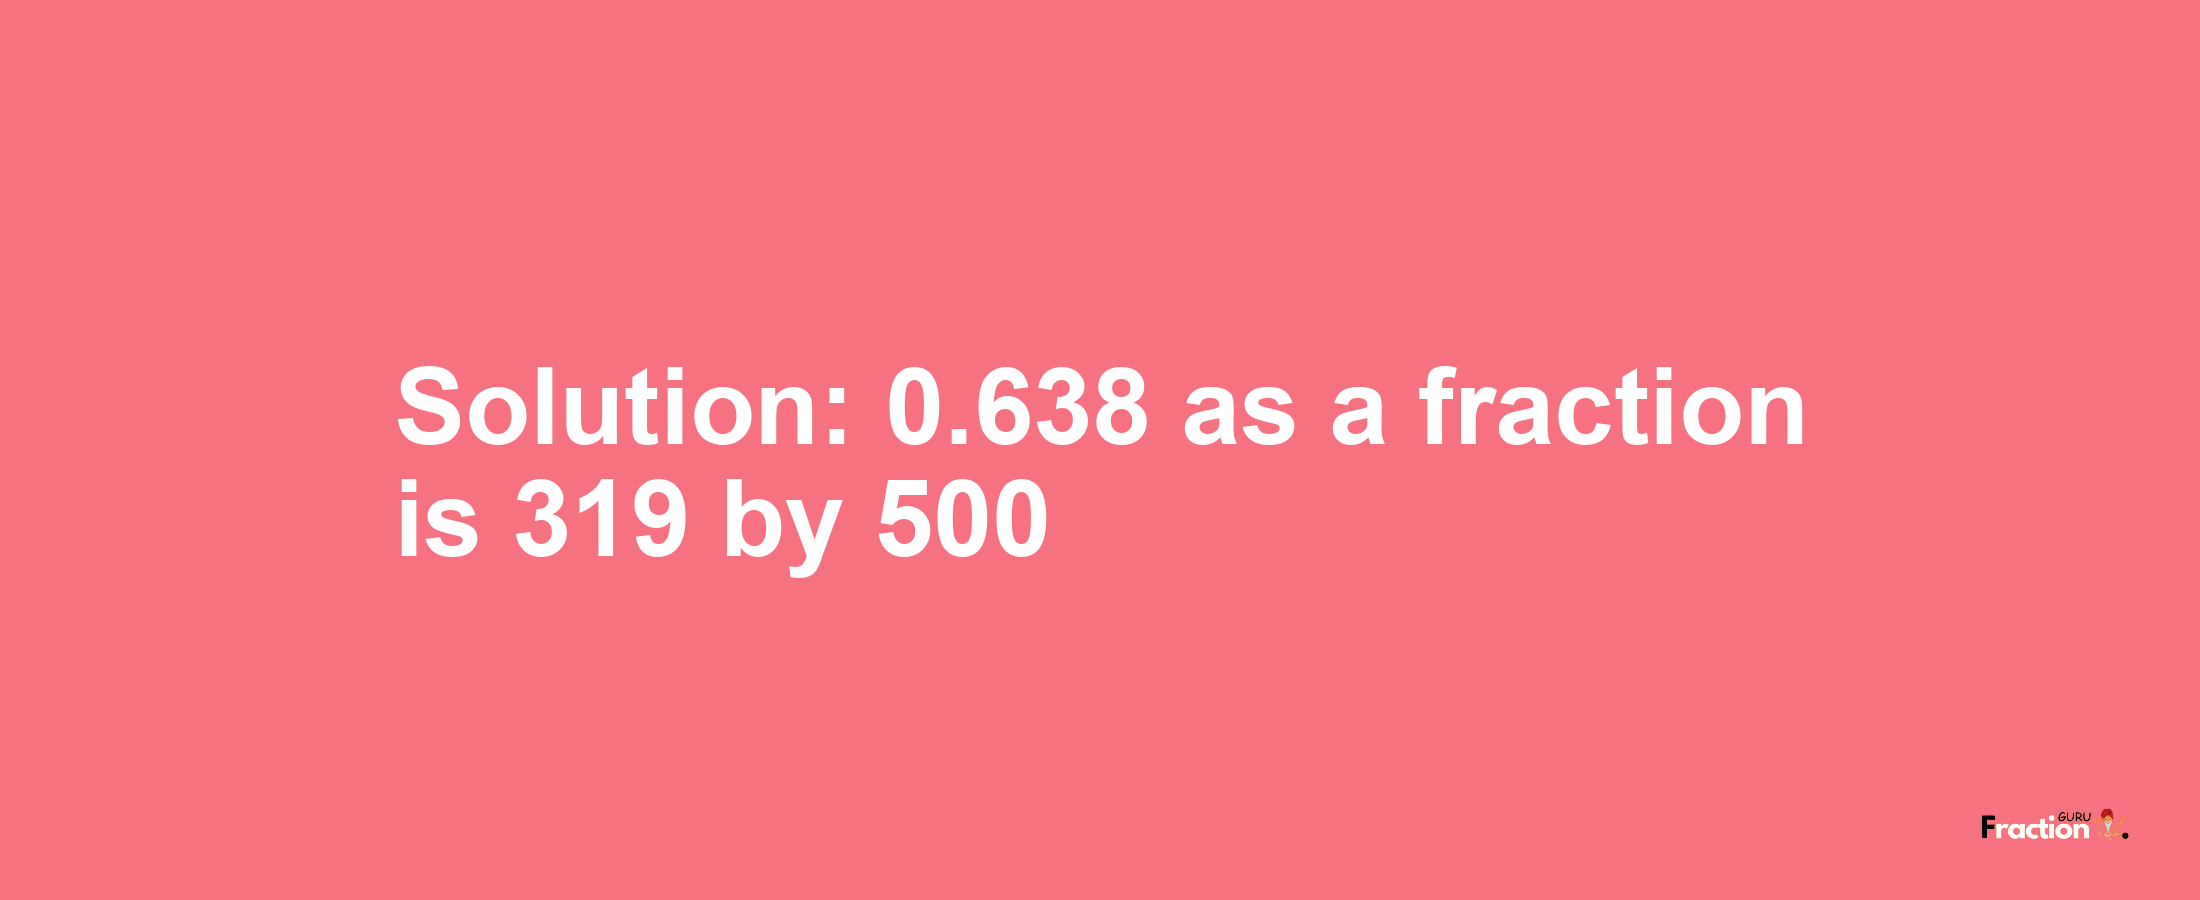 Solution:0.638 as a fraction is 319/500